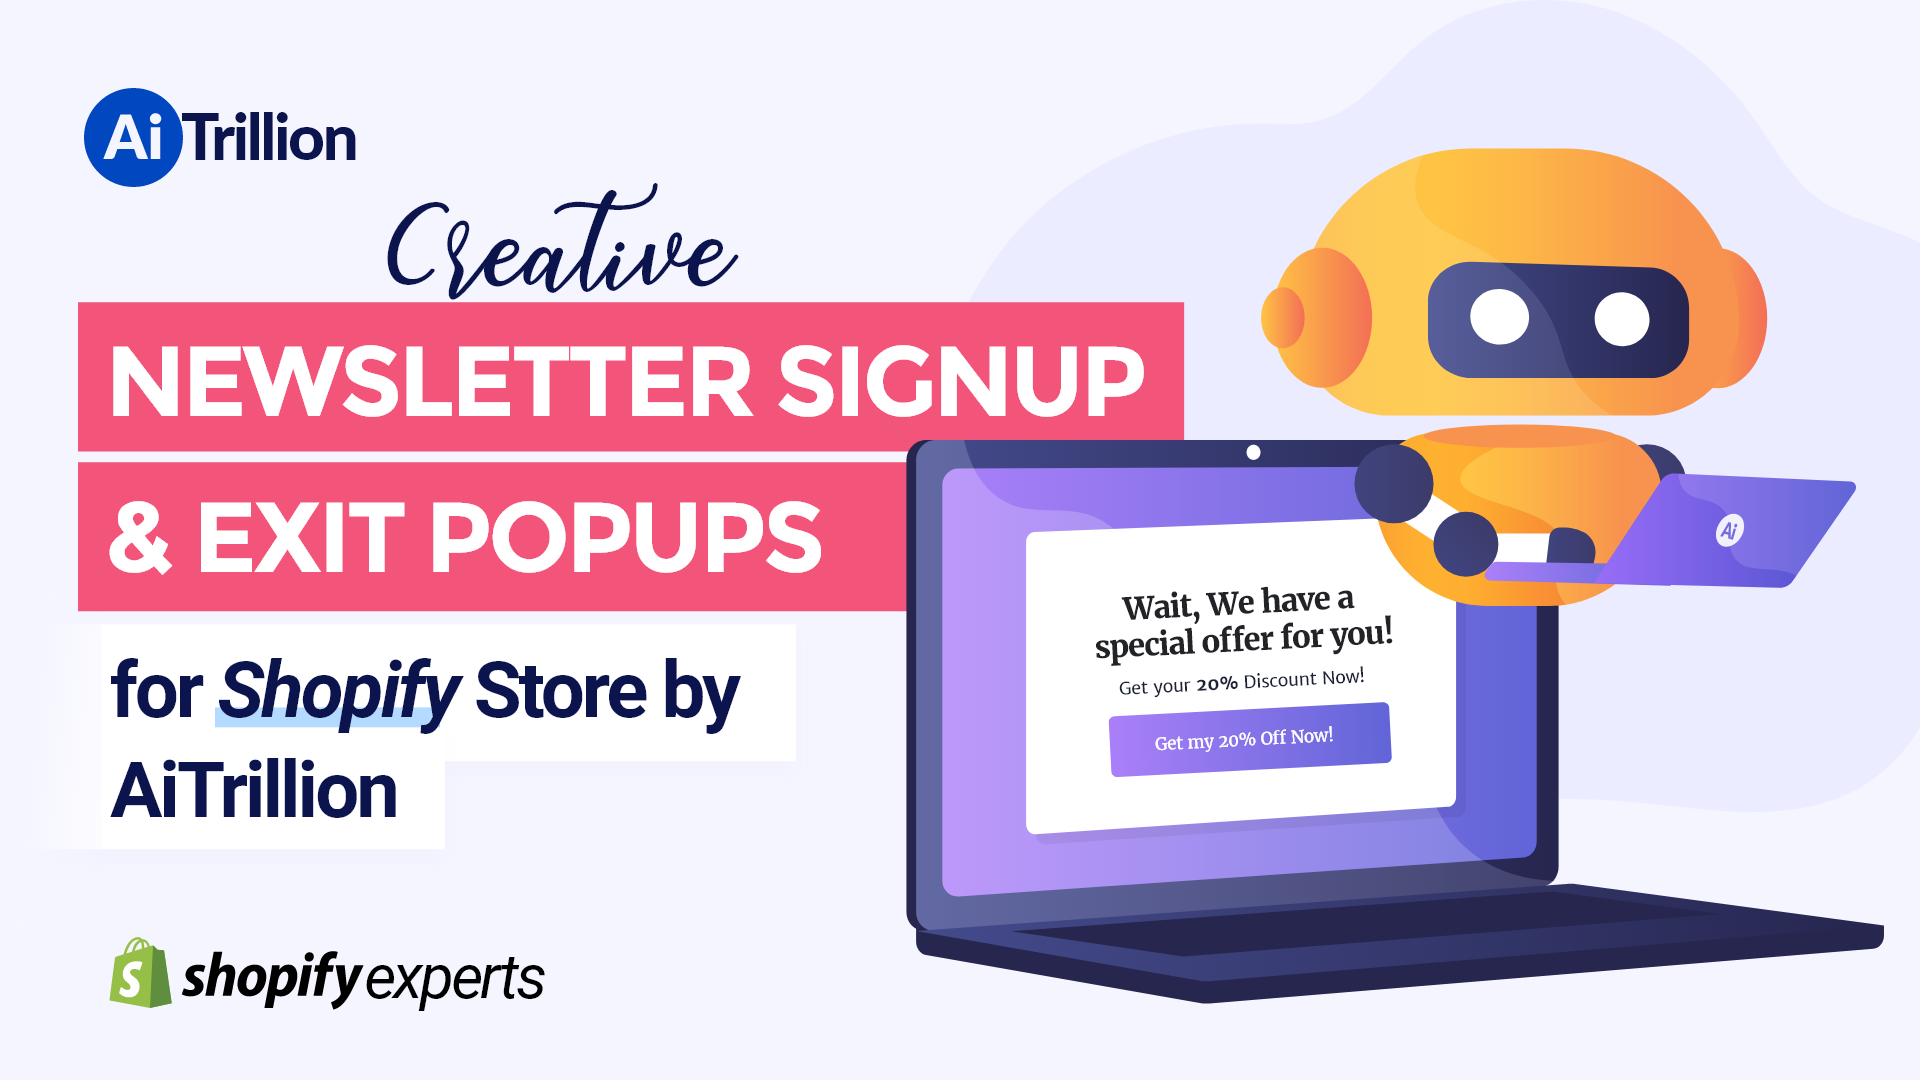 Creative Newsletter Signup & Exit Popups for Shopify Store AiTrillion